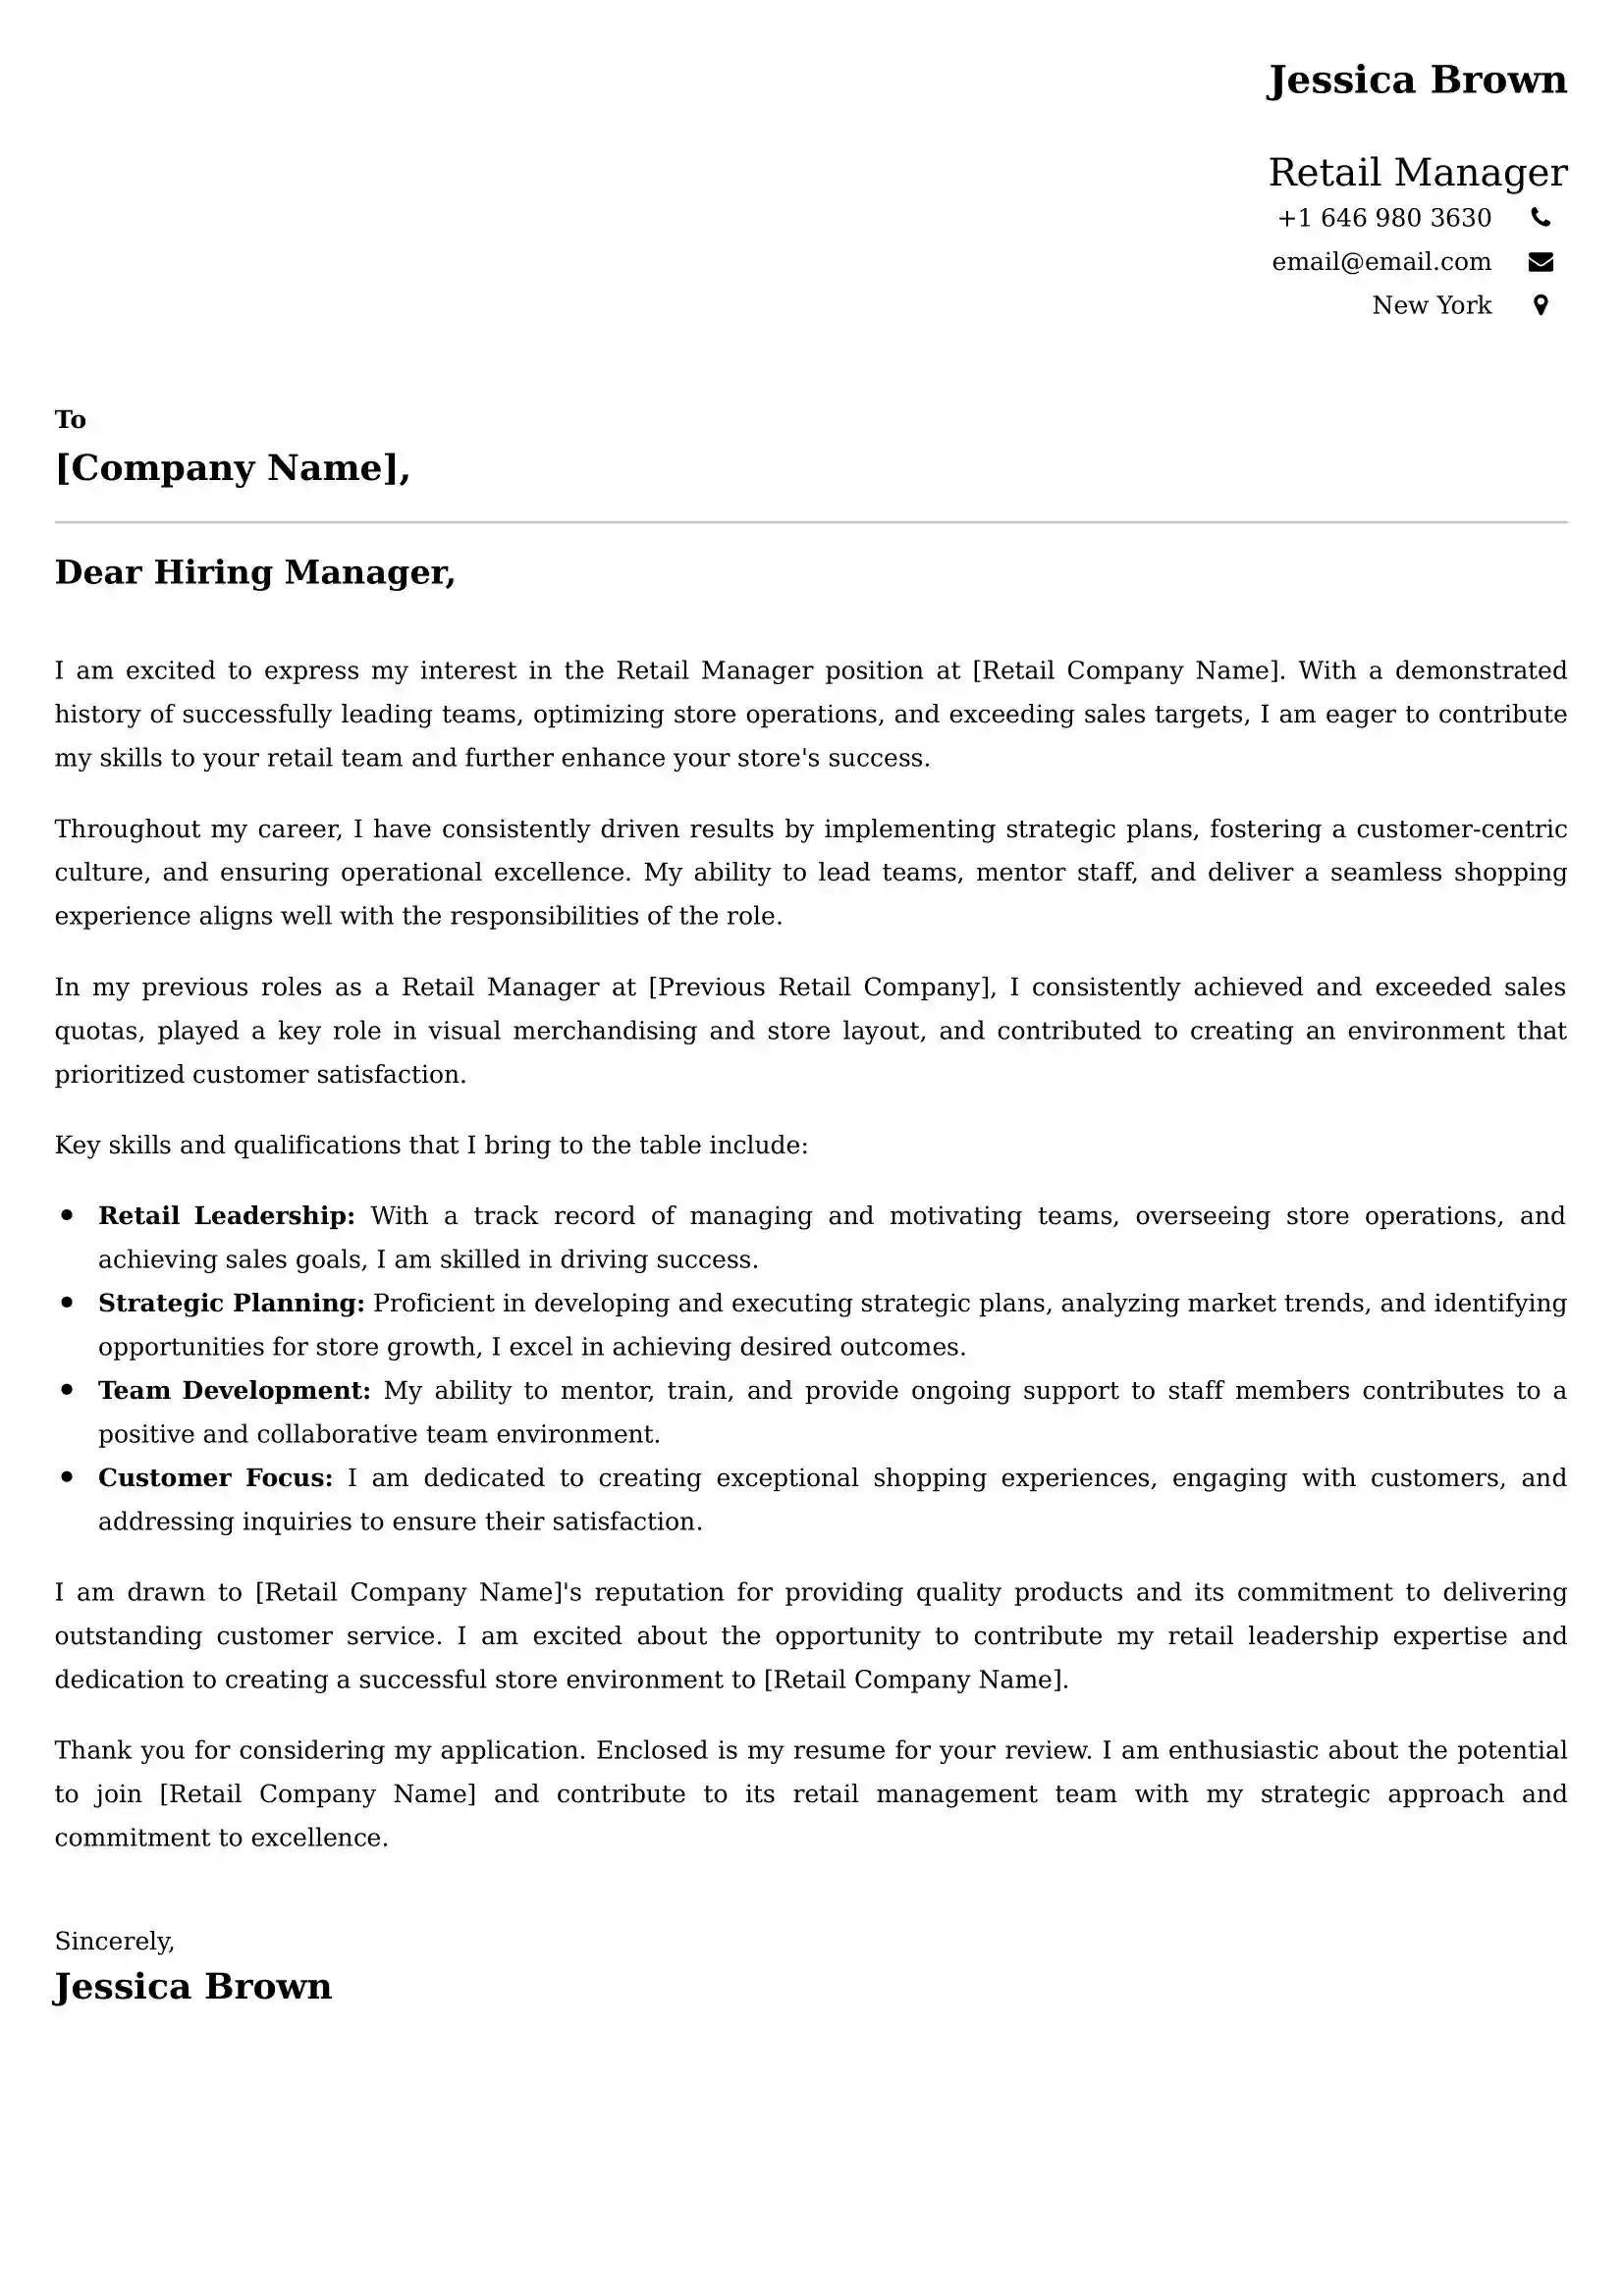 Retail Manager Cover Letter Examples for UK 